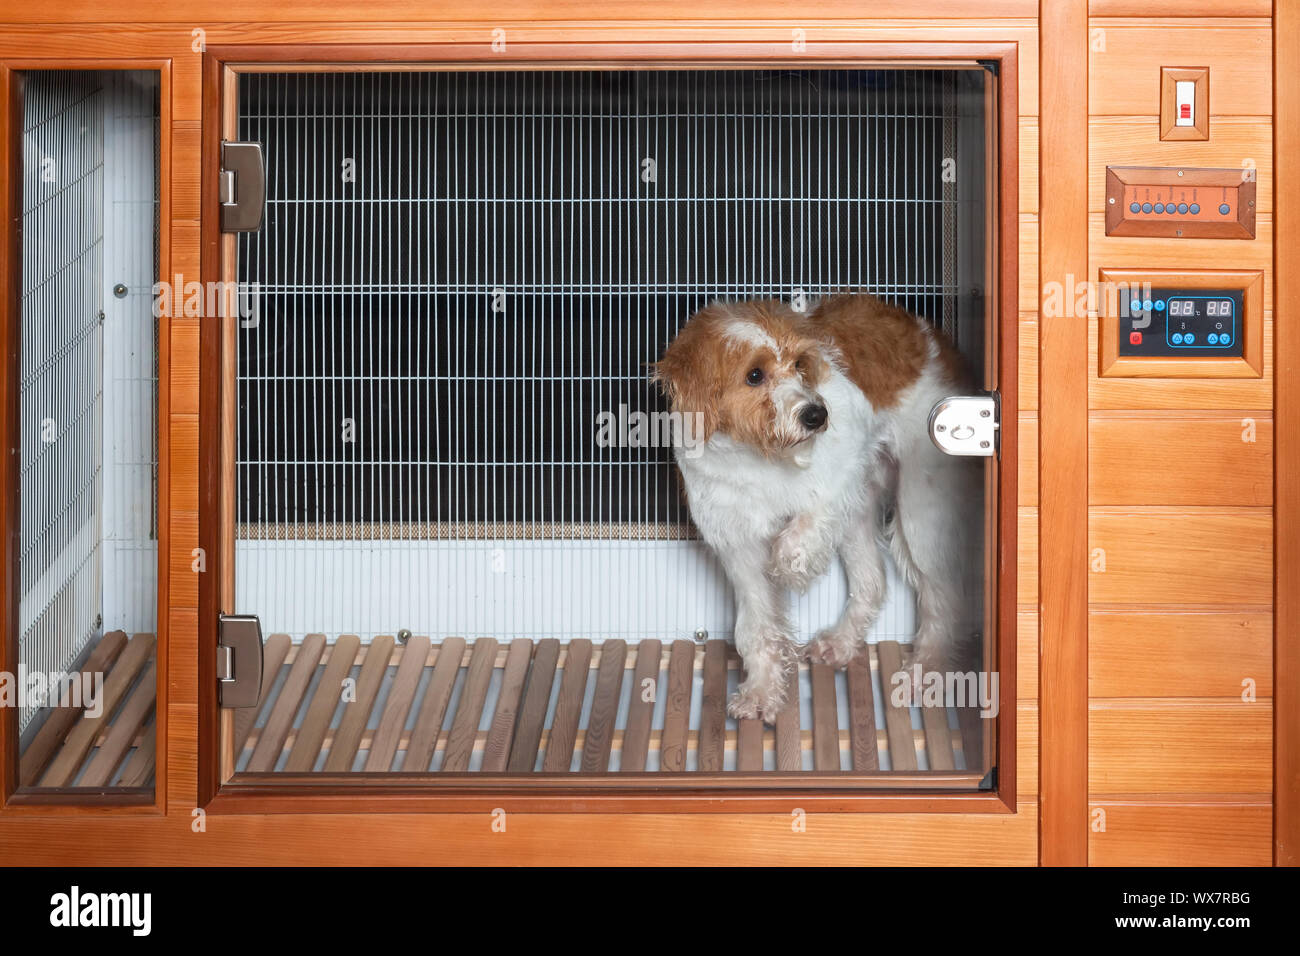 dog in a pet dryer Stock Photo